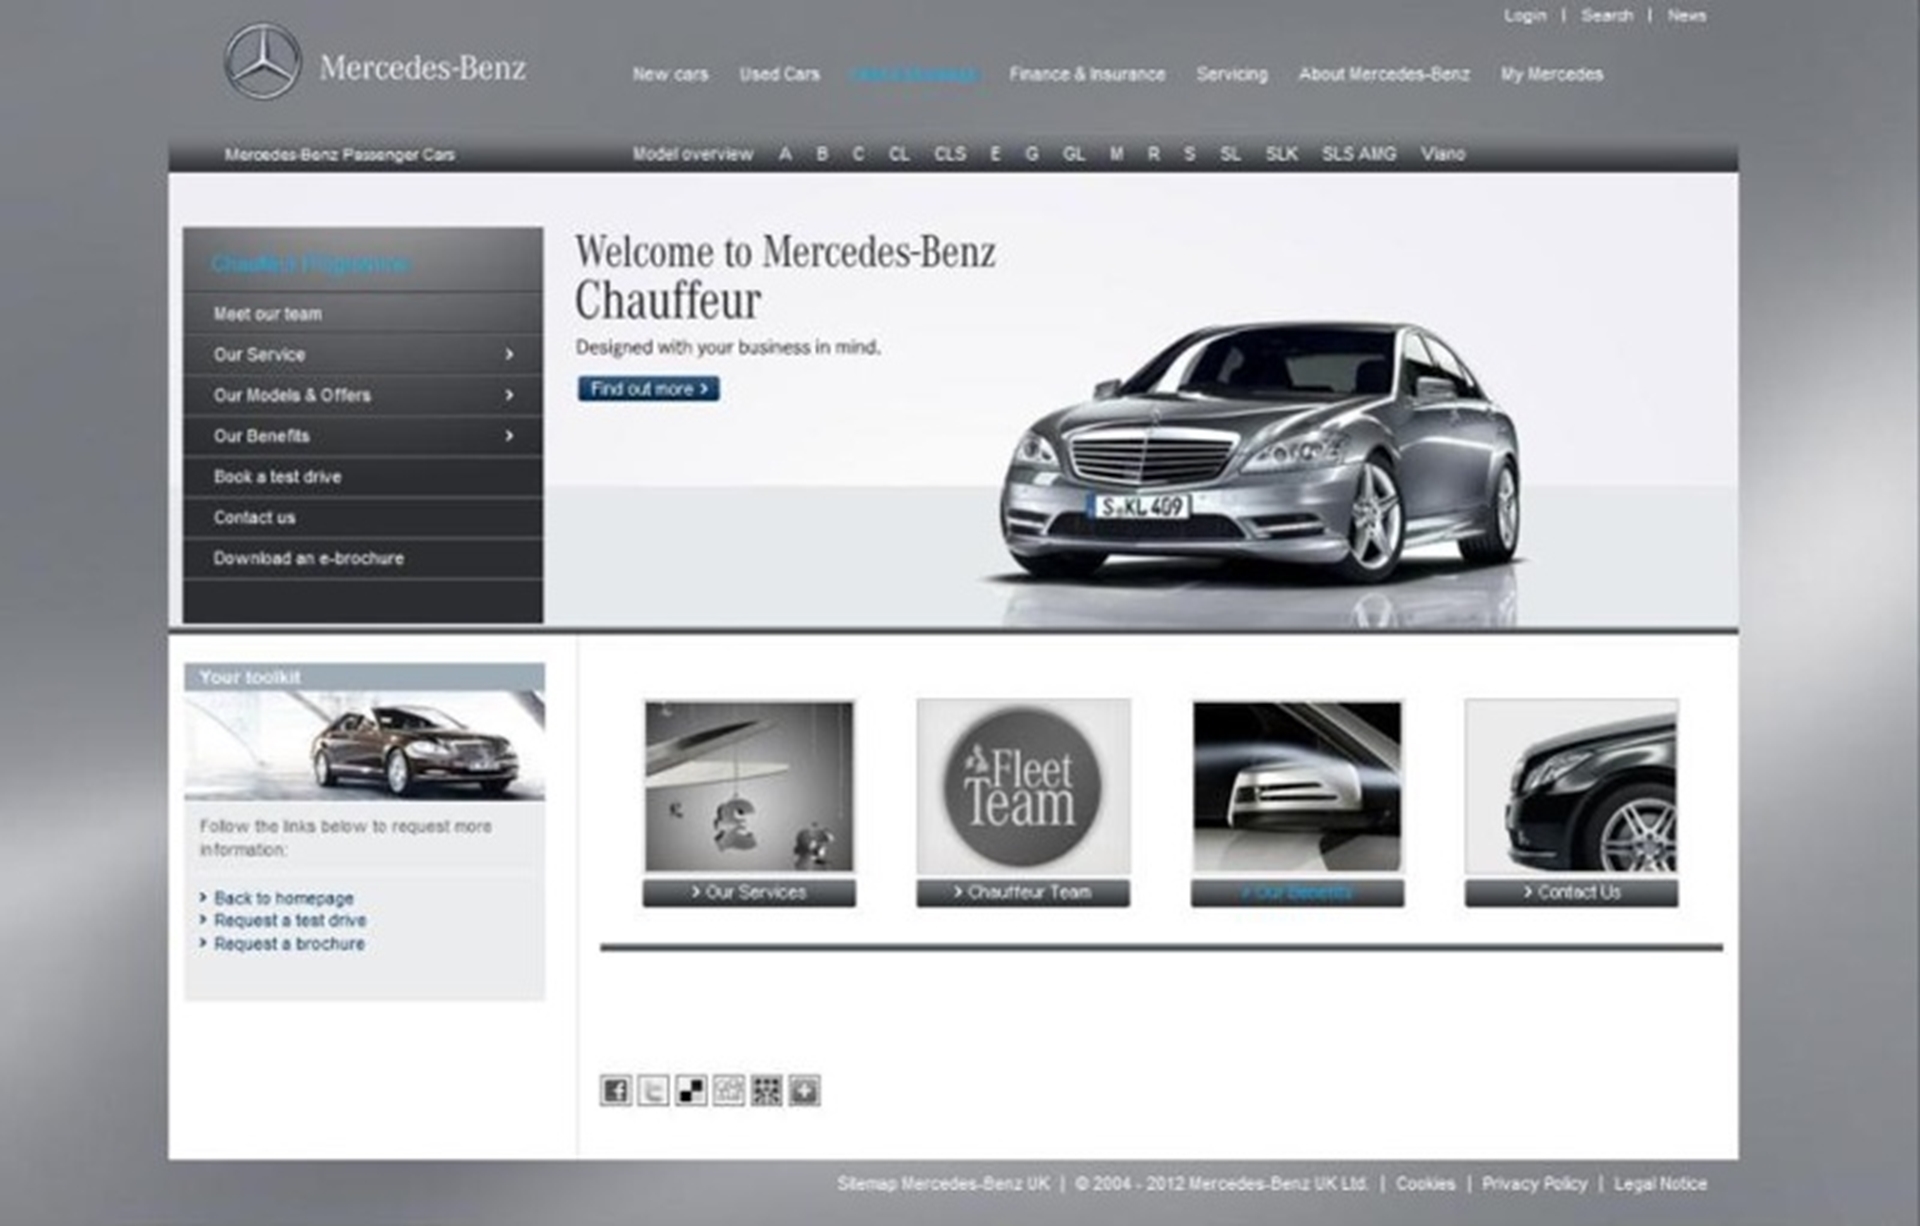 MERCEDES-BENZ LAUNCHES ITS NEW CHAUFFEUR WEBSITE